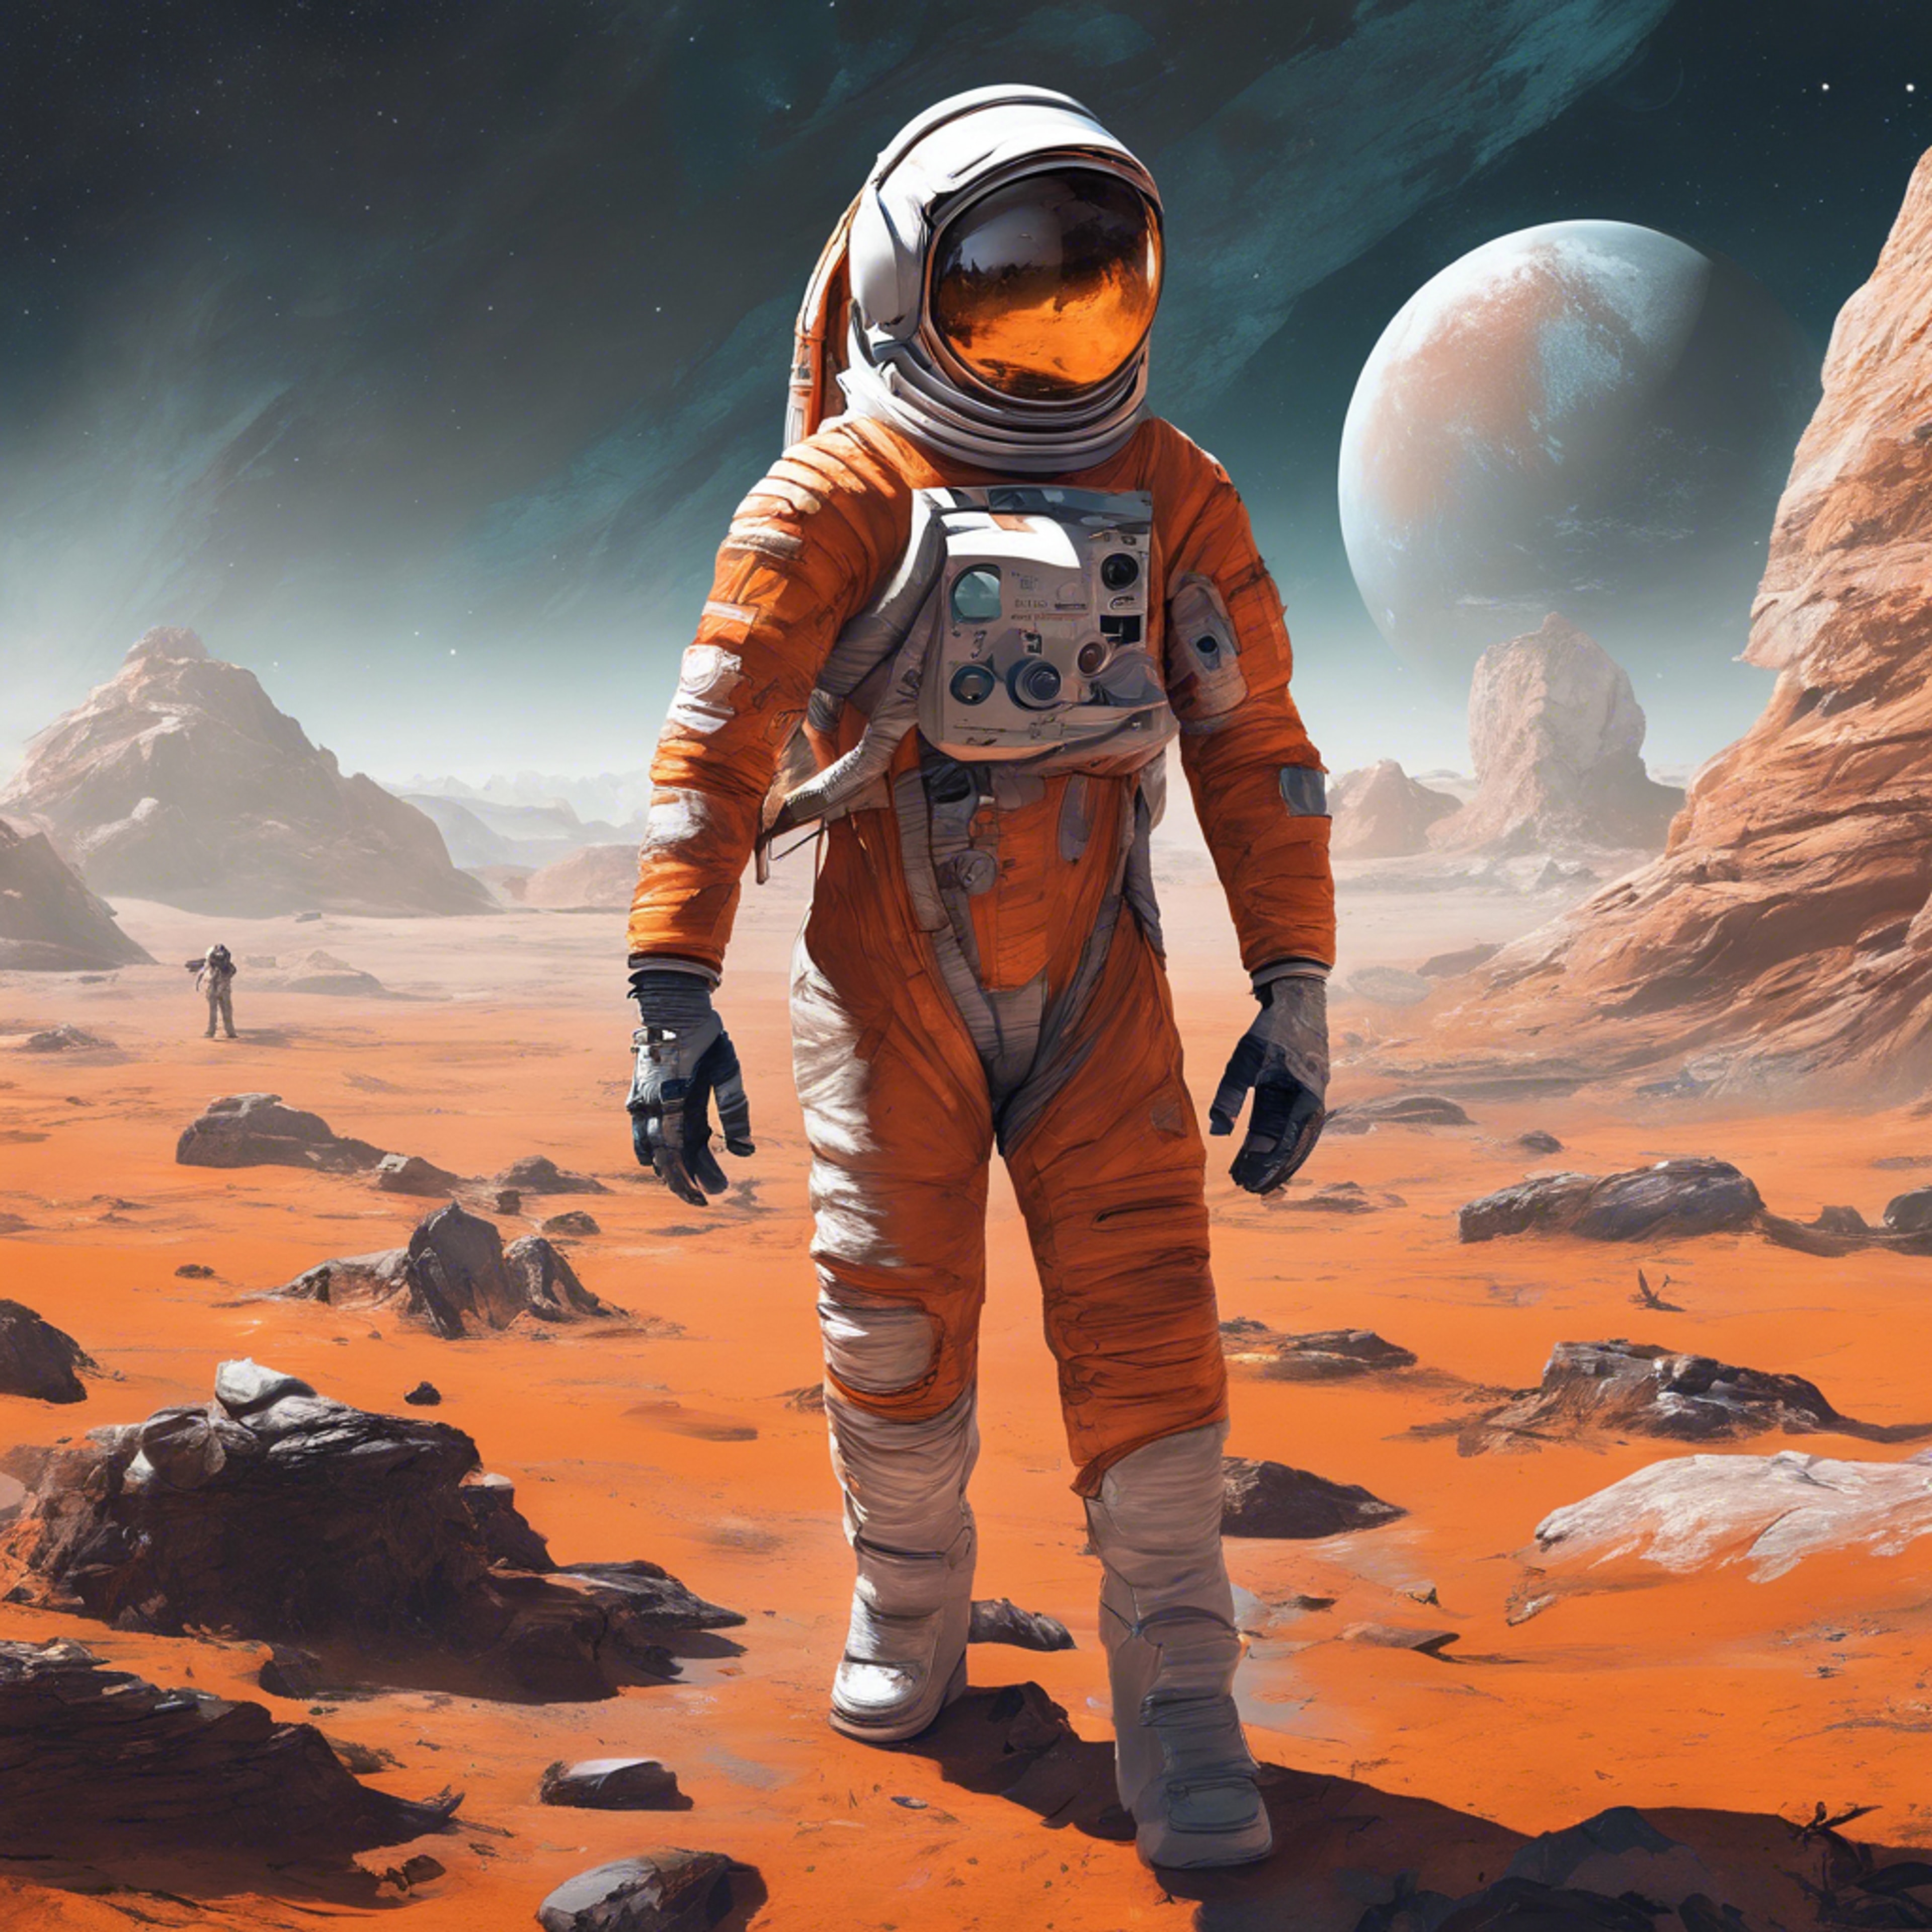 A space-themed video game featuring an astronaut in an orange and white suit exploring an alien planet. کاغذ دیواری[5d2c49abc07a4c83ad01]